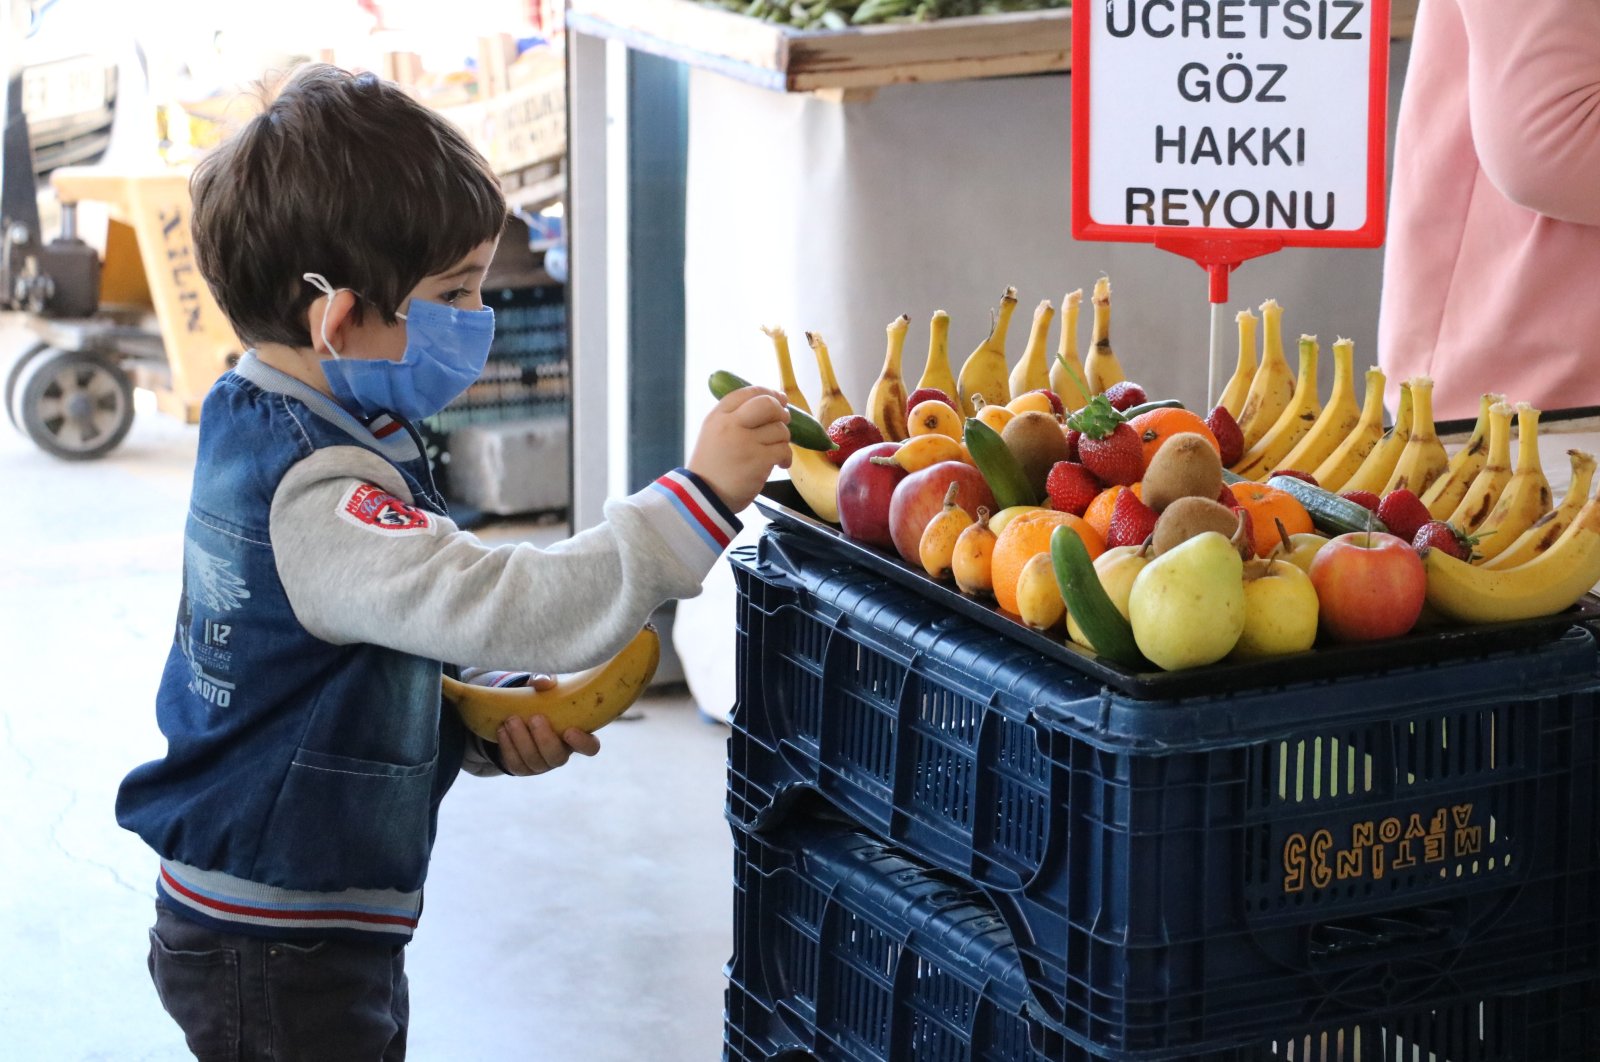 A child picks a piece of fruit from a stand offering free produce, in Afyon, western Turkey, April 29, 2021. (DHA PHOTO)